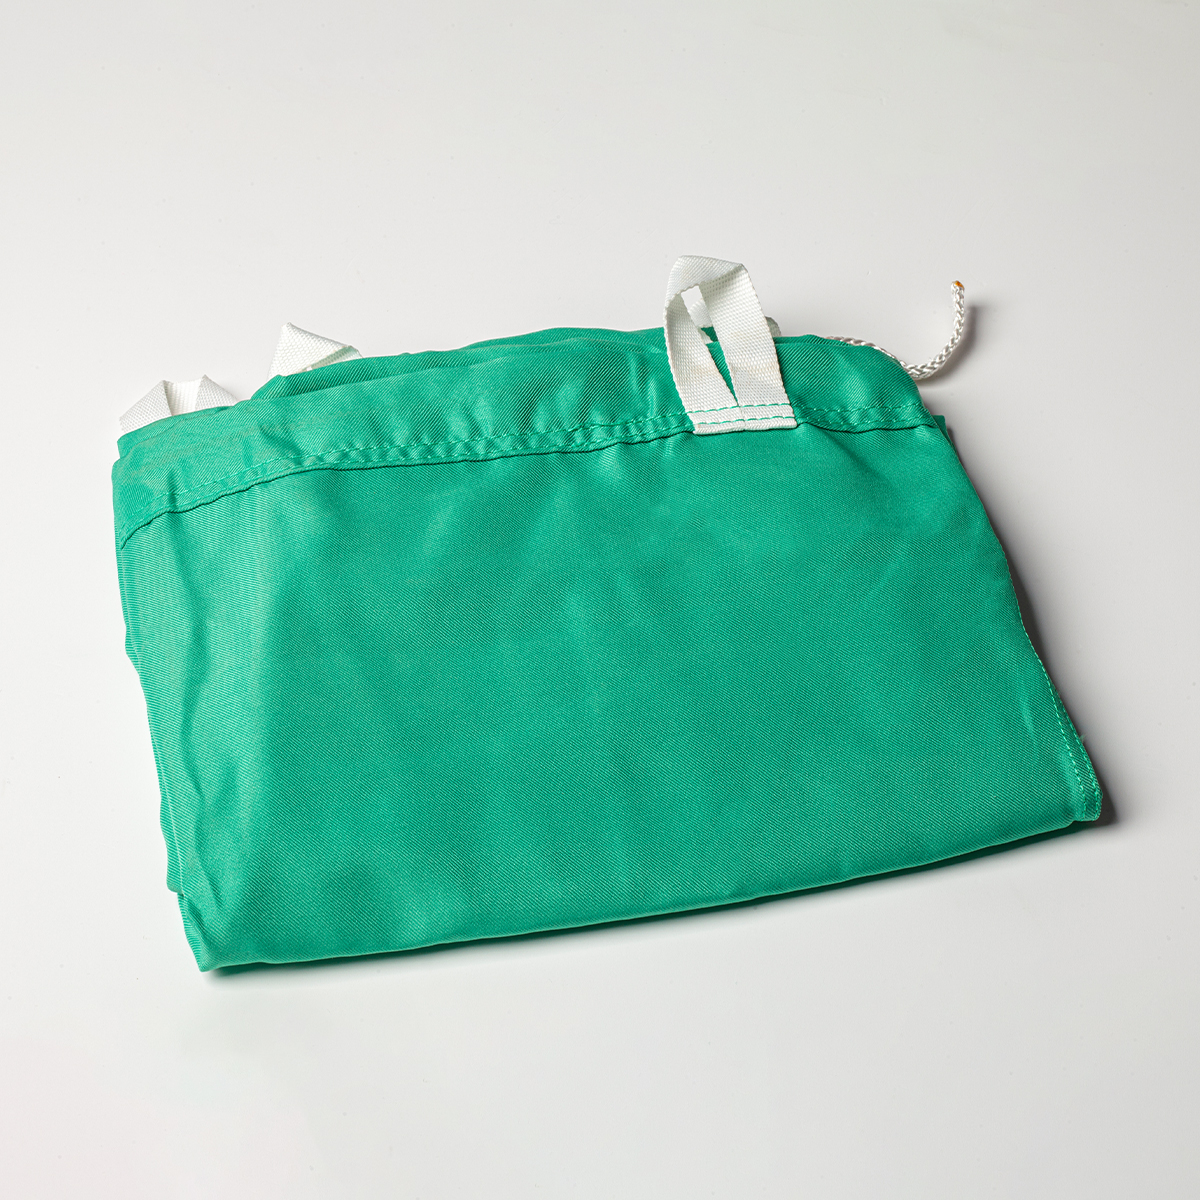 Image of Laundry Bag - Green